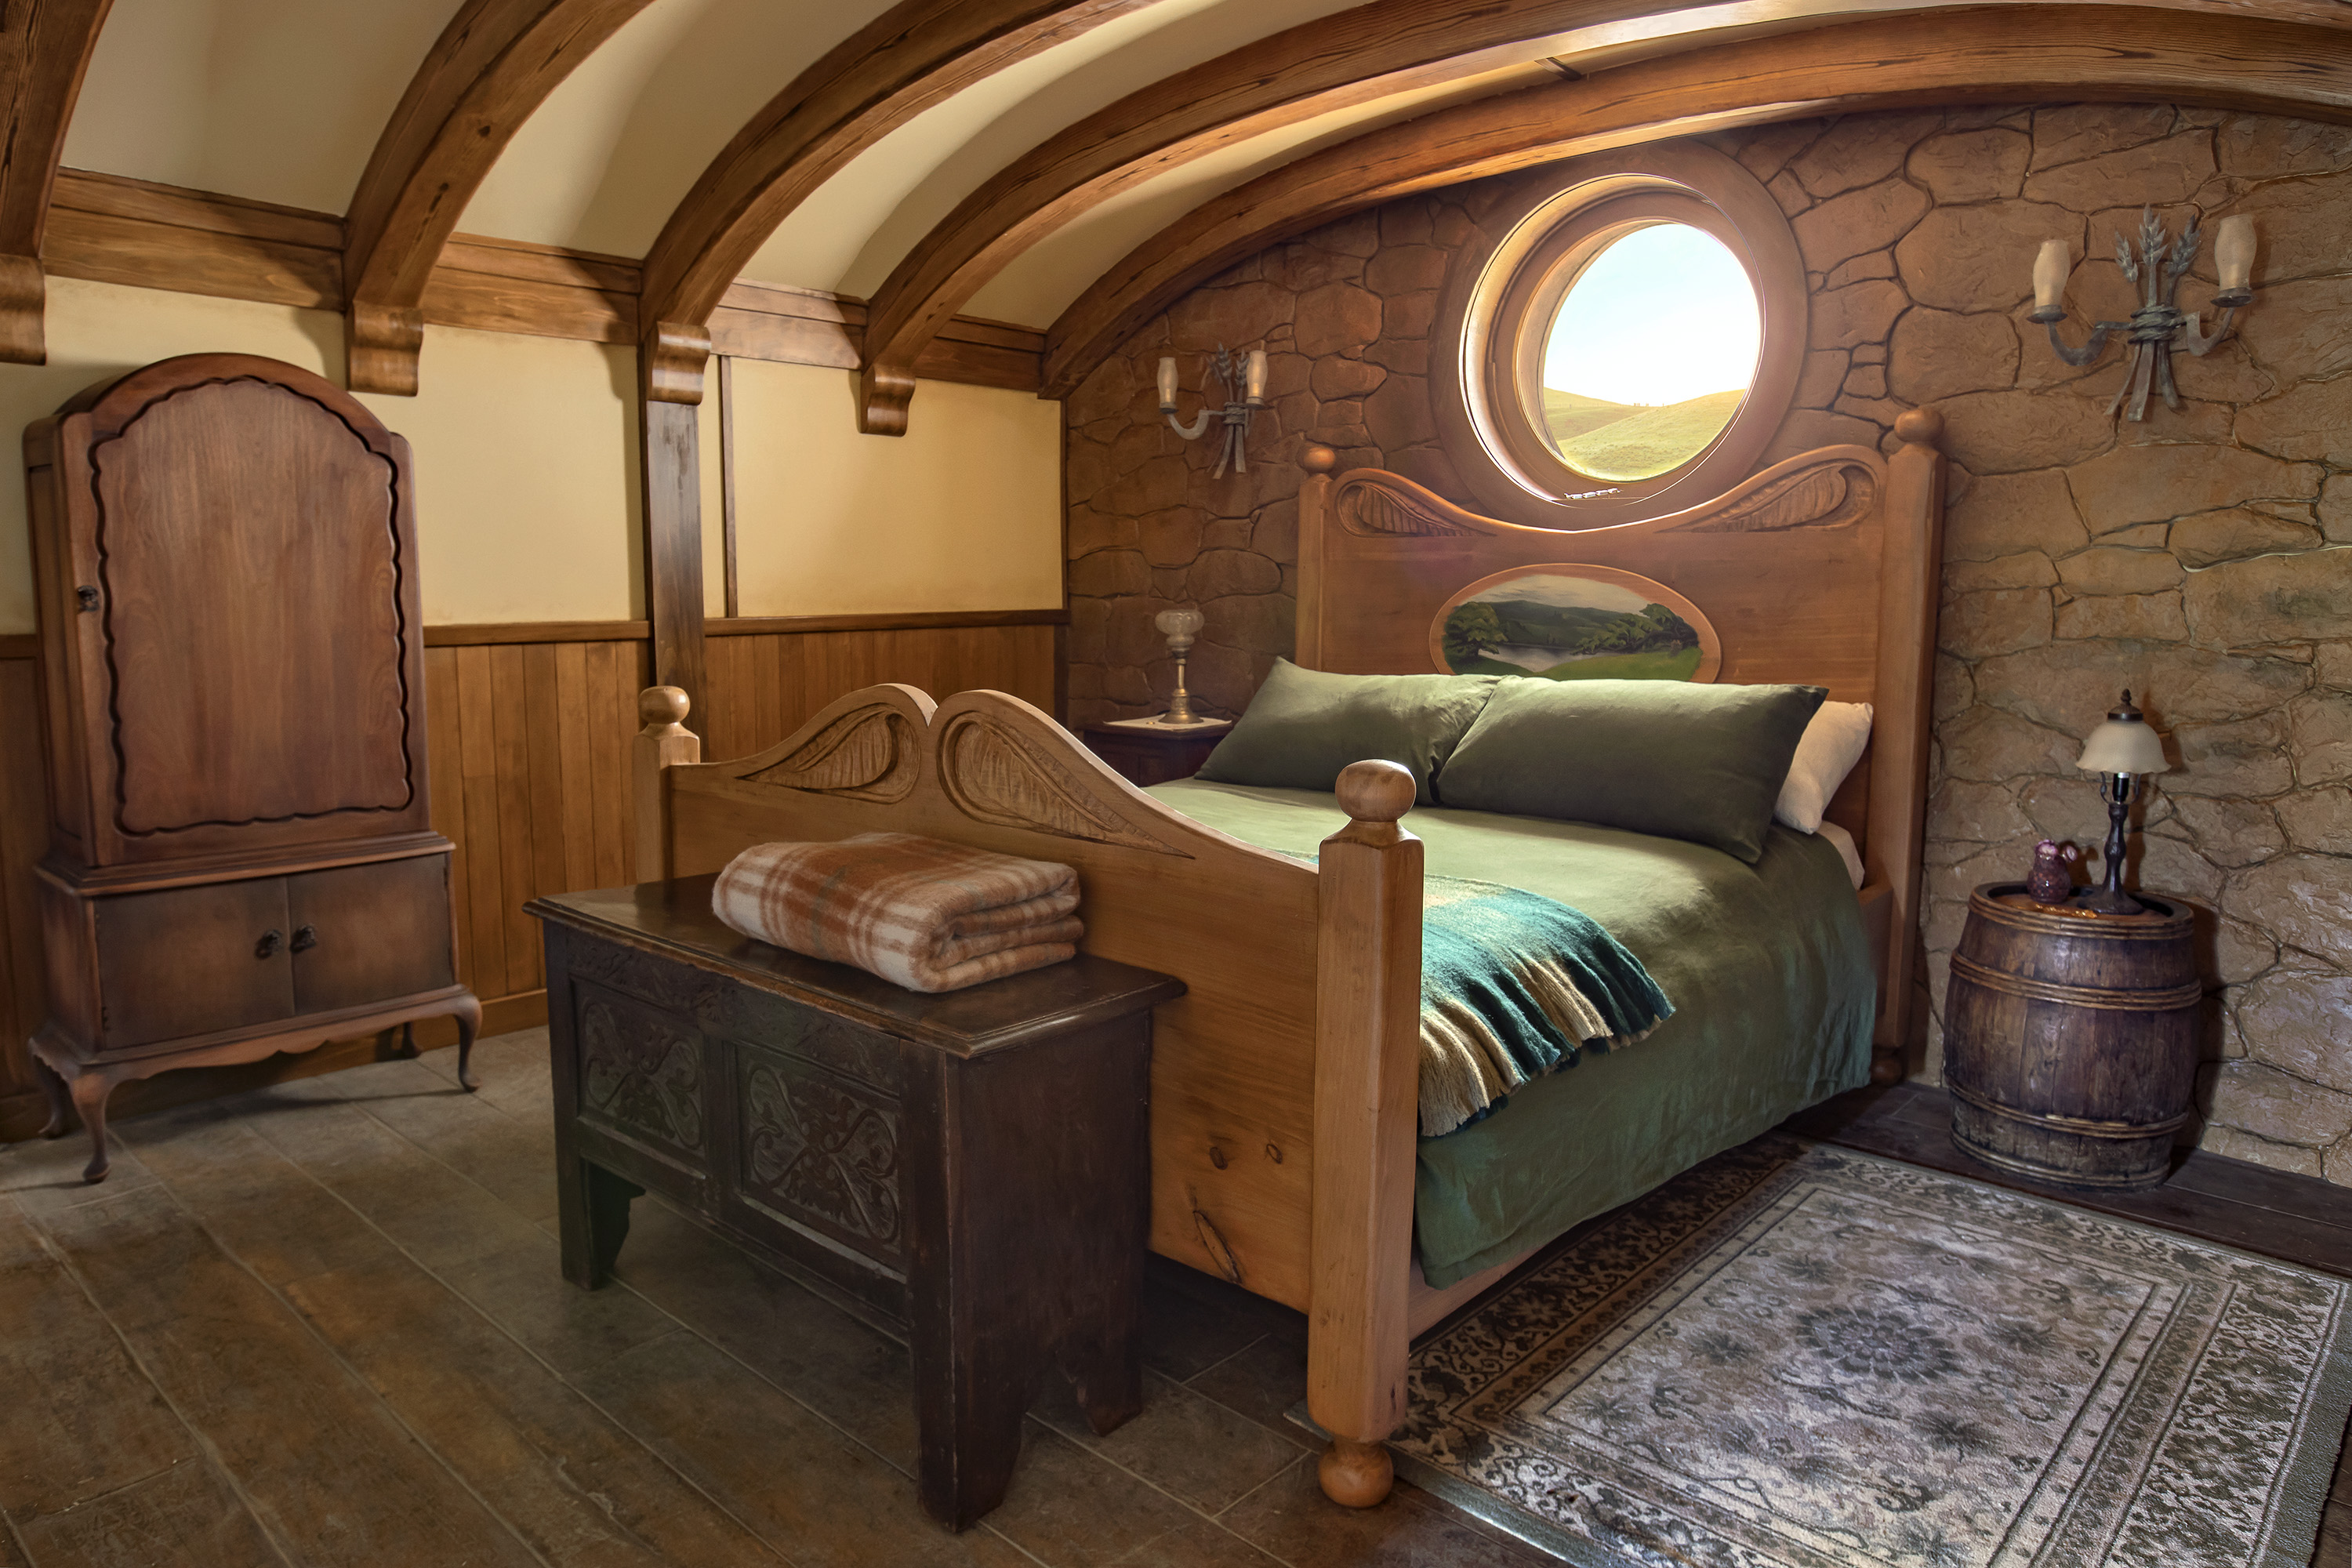 Bedroom view with wood floors, a wooden chest closet and a large wooden bed with green pillows and blankets. A small oriental rug lays alongside the bed and a wooden storage bench is at the end of the bed. A small porthole window is above the bed's headboard.